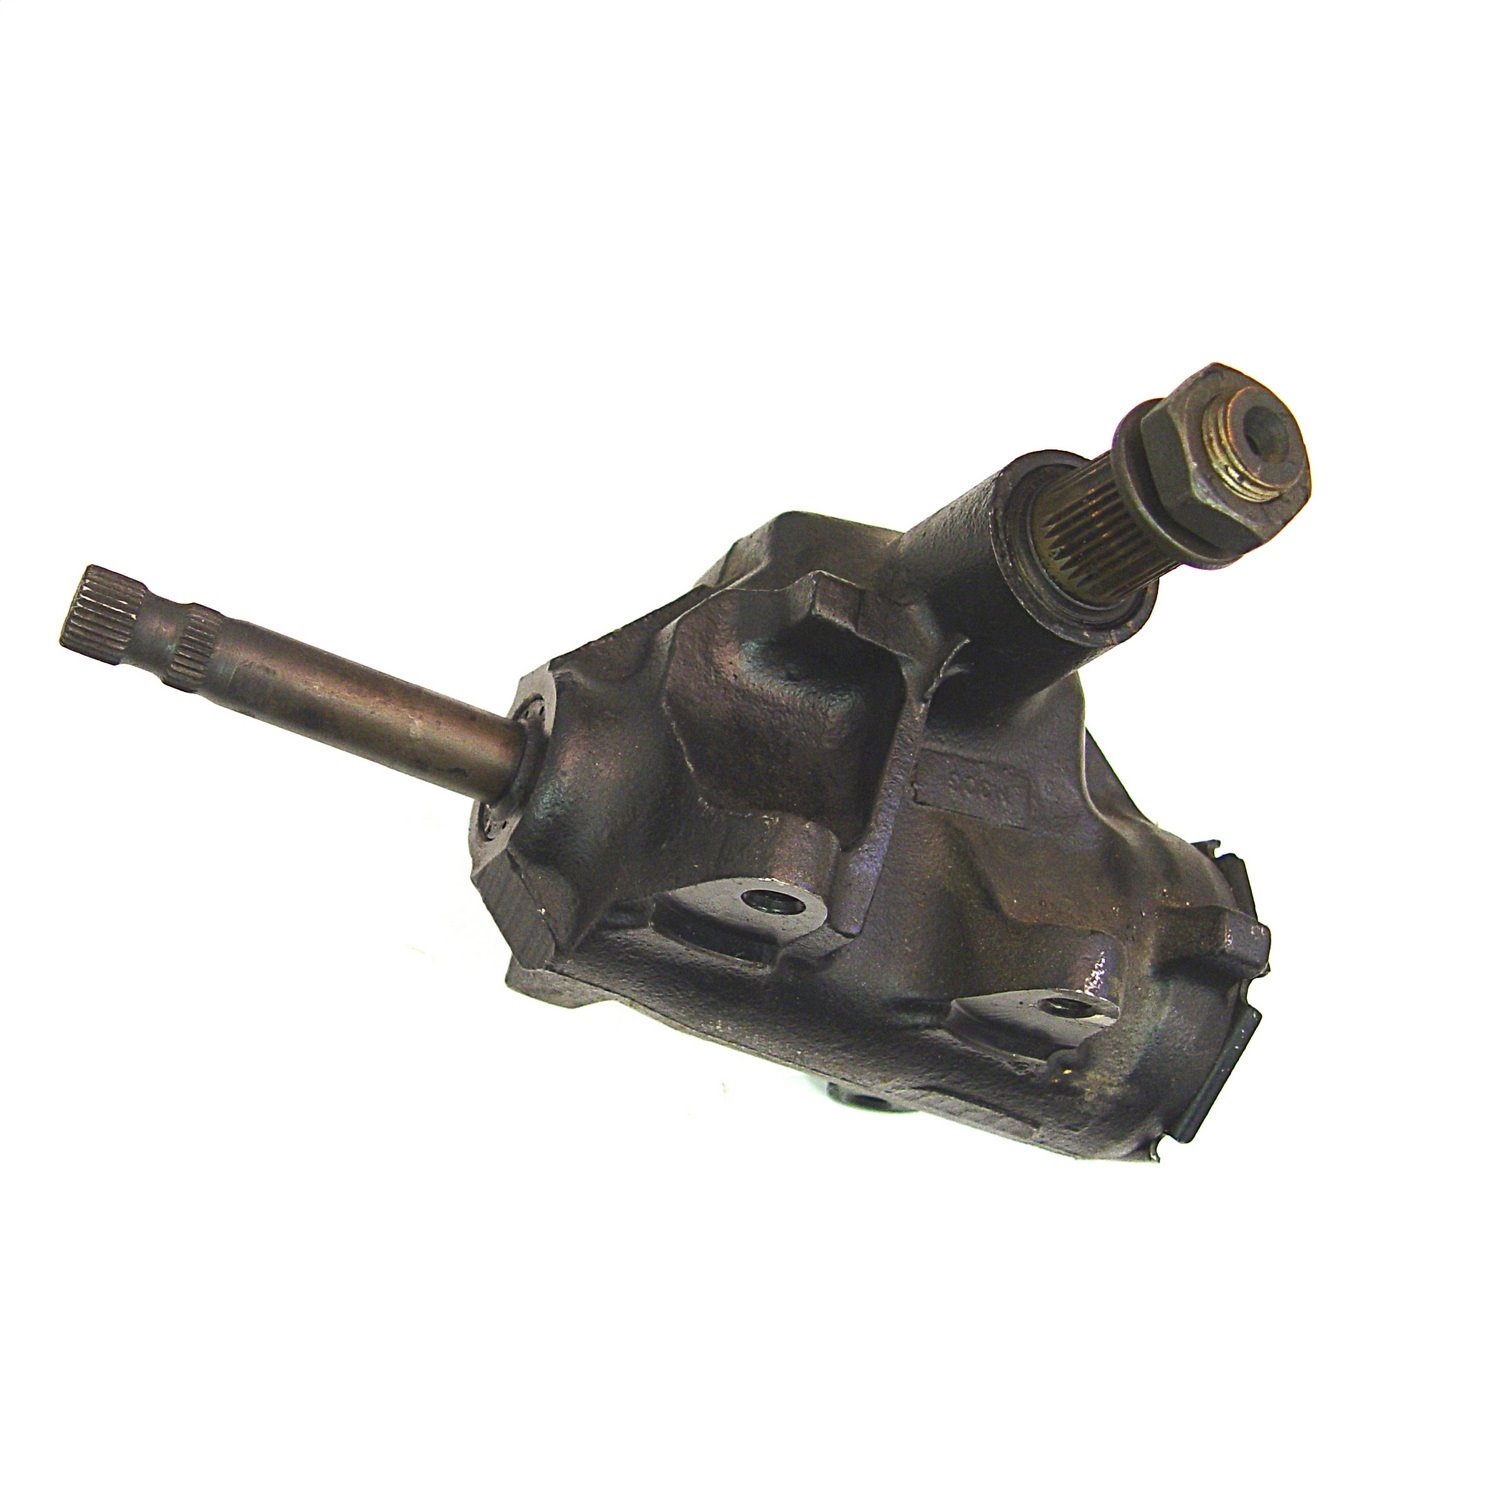 This manual steering gear box from Omix-ADA fits 87-95 Jeep Wrangler YJ 97-98 TJ Wrangler and 84-93 XJ Cherokees.